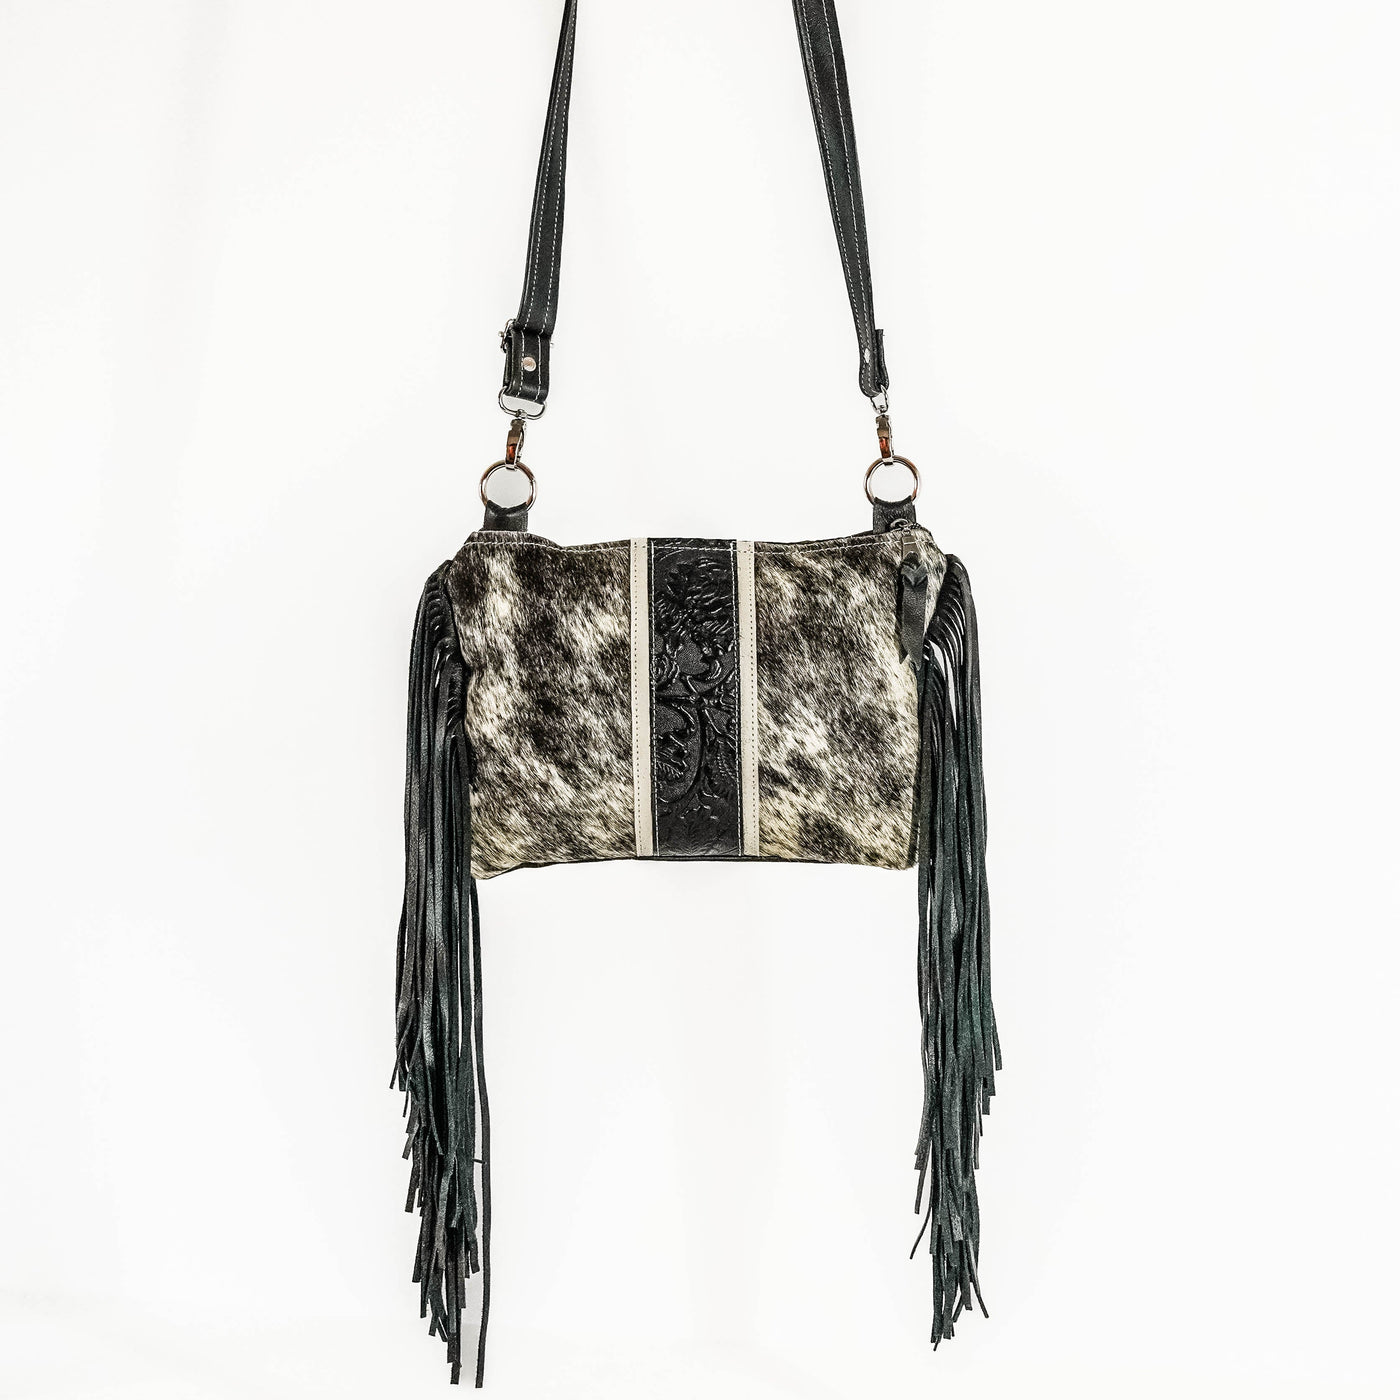 Patsy - Black & White w/ Onyx Tool-Patsy-Western-Cowhide-Bags-Handmade-Products-Gifts-Dancing Cactus Designs